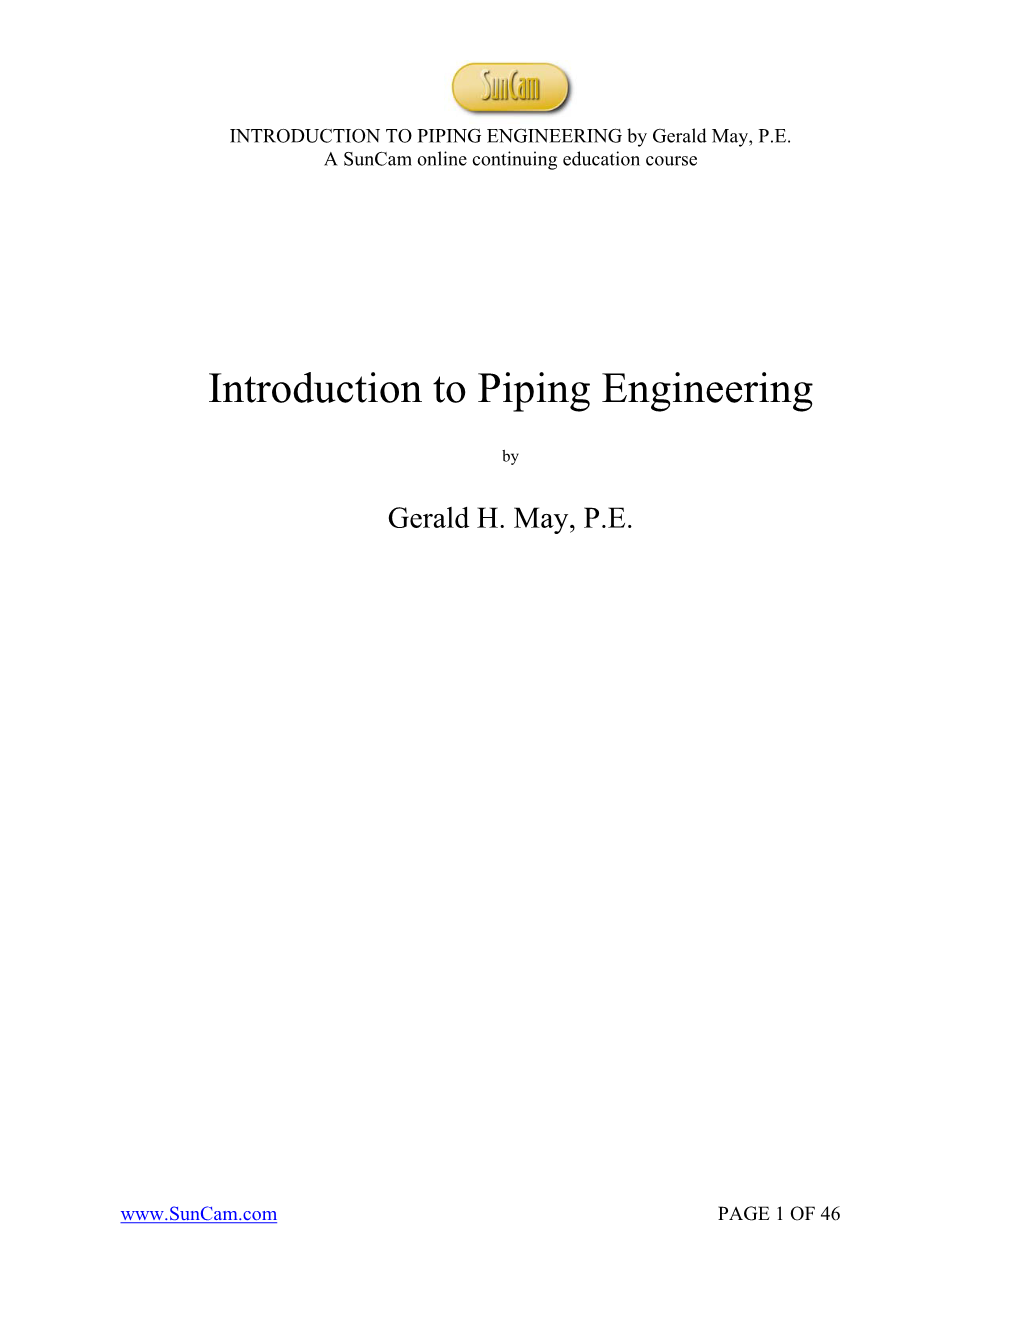 INTRODUCTION to PIPING ENGINEERING by Gerald May, P.E